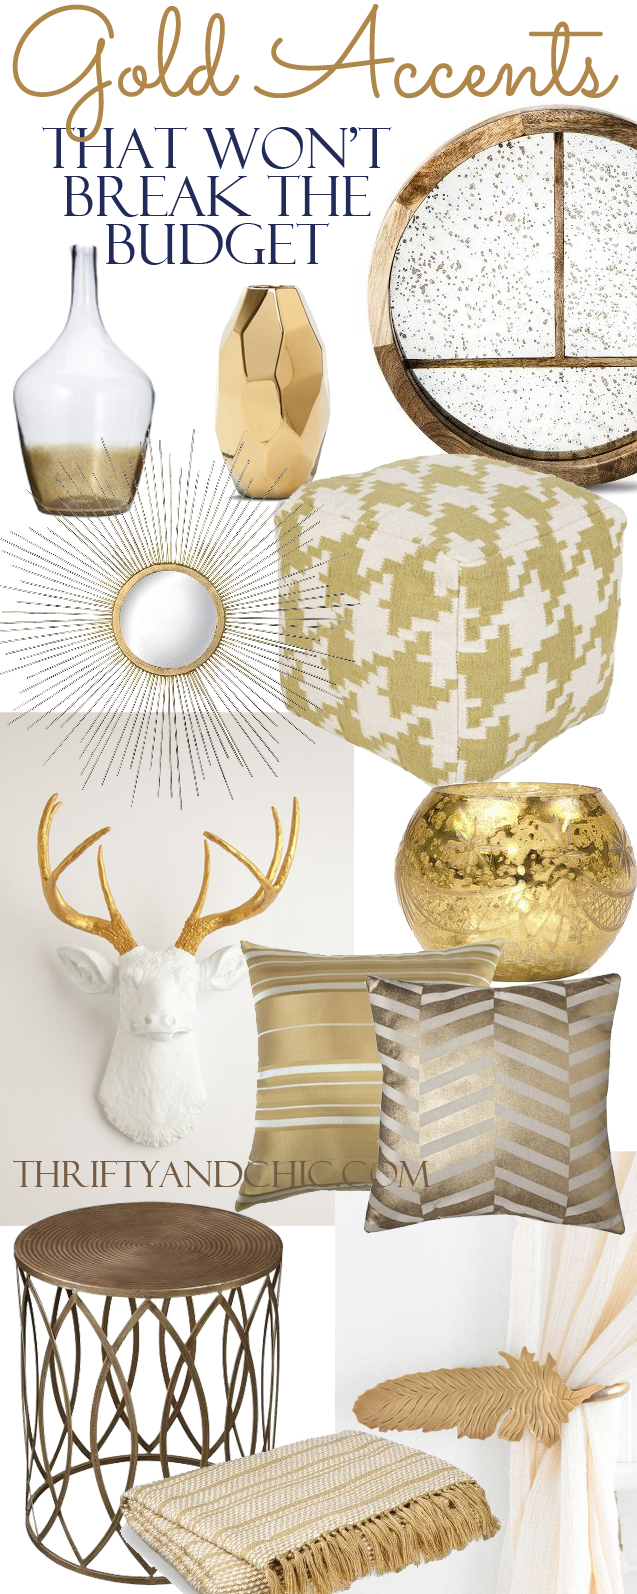 18 gold home decor pieces that wont breat the budget. Divided up into price!